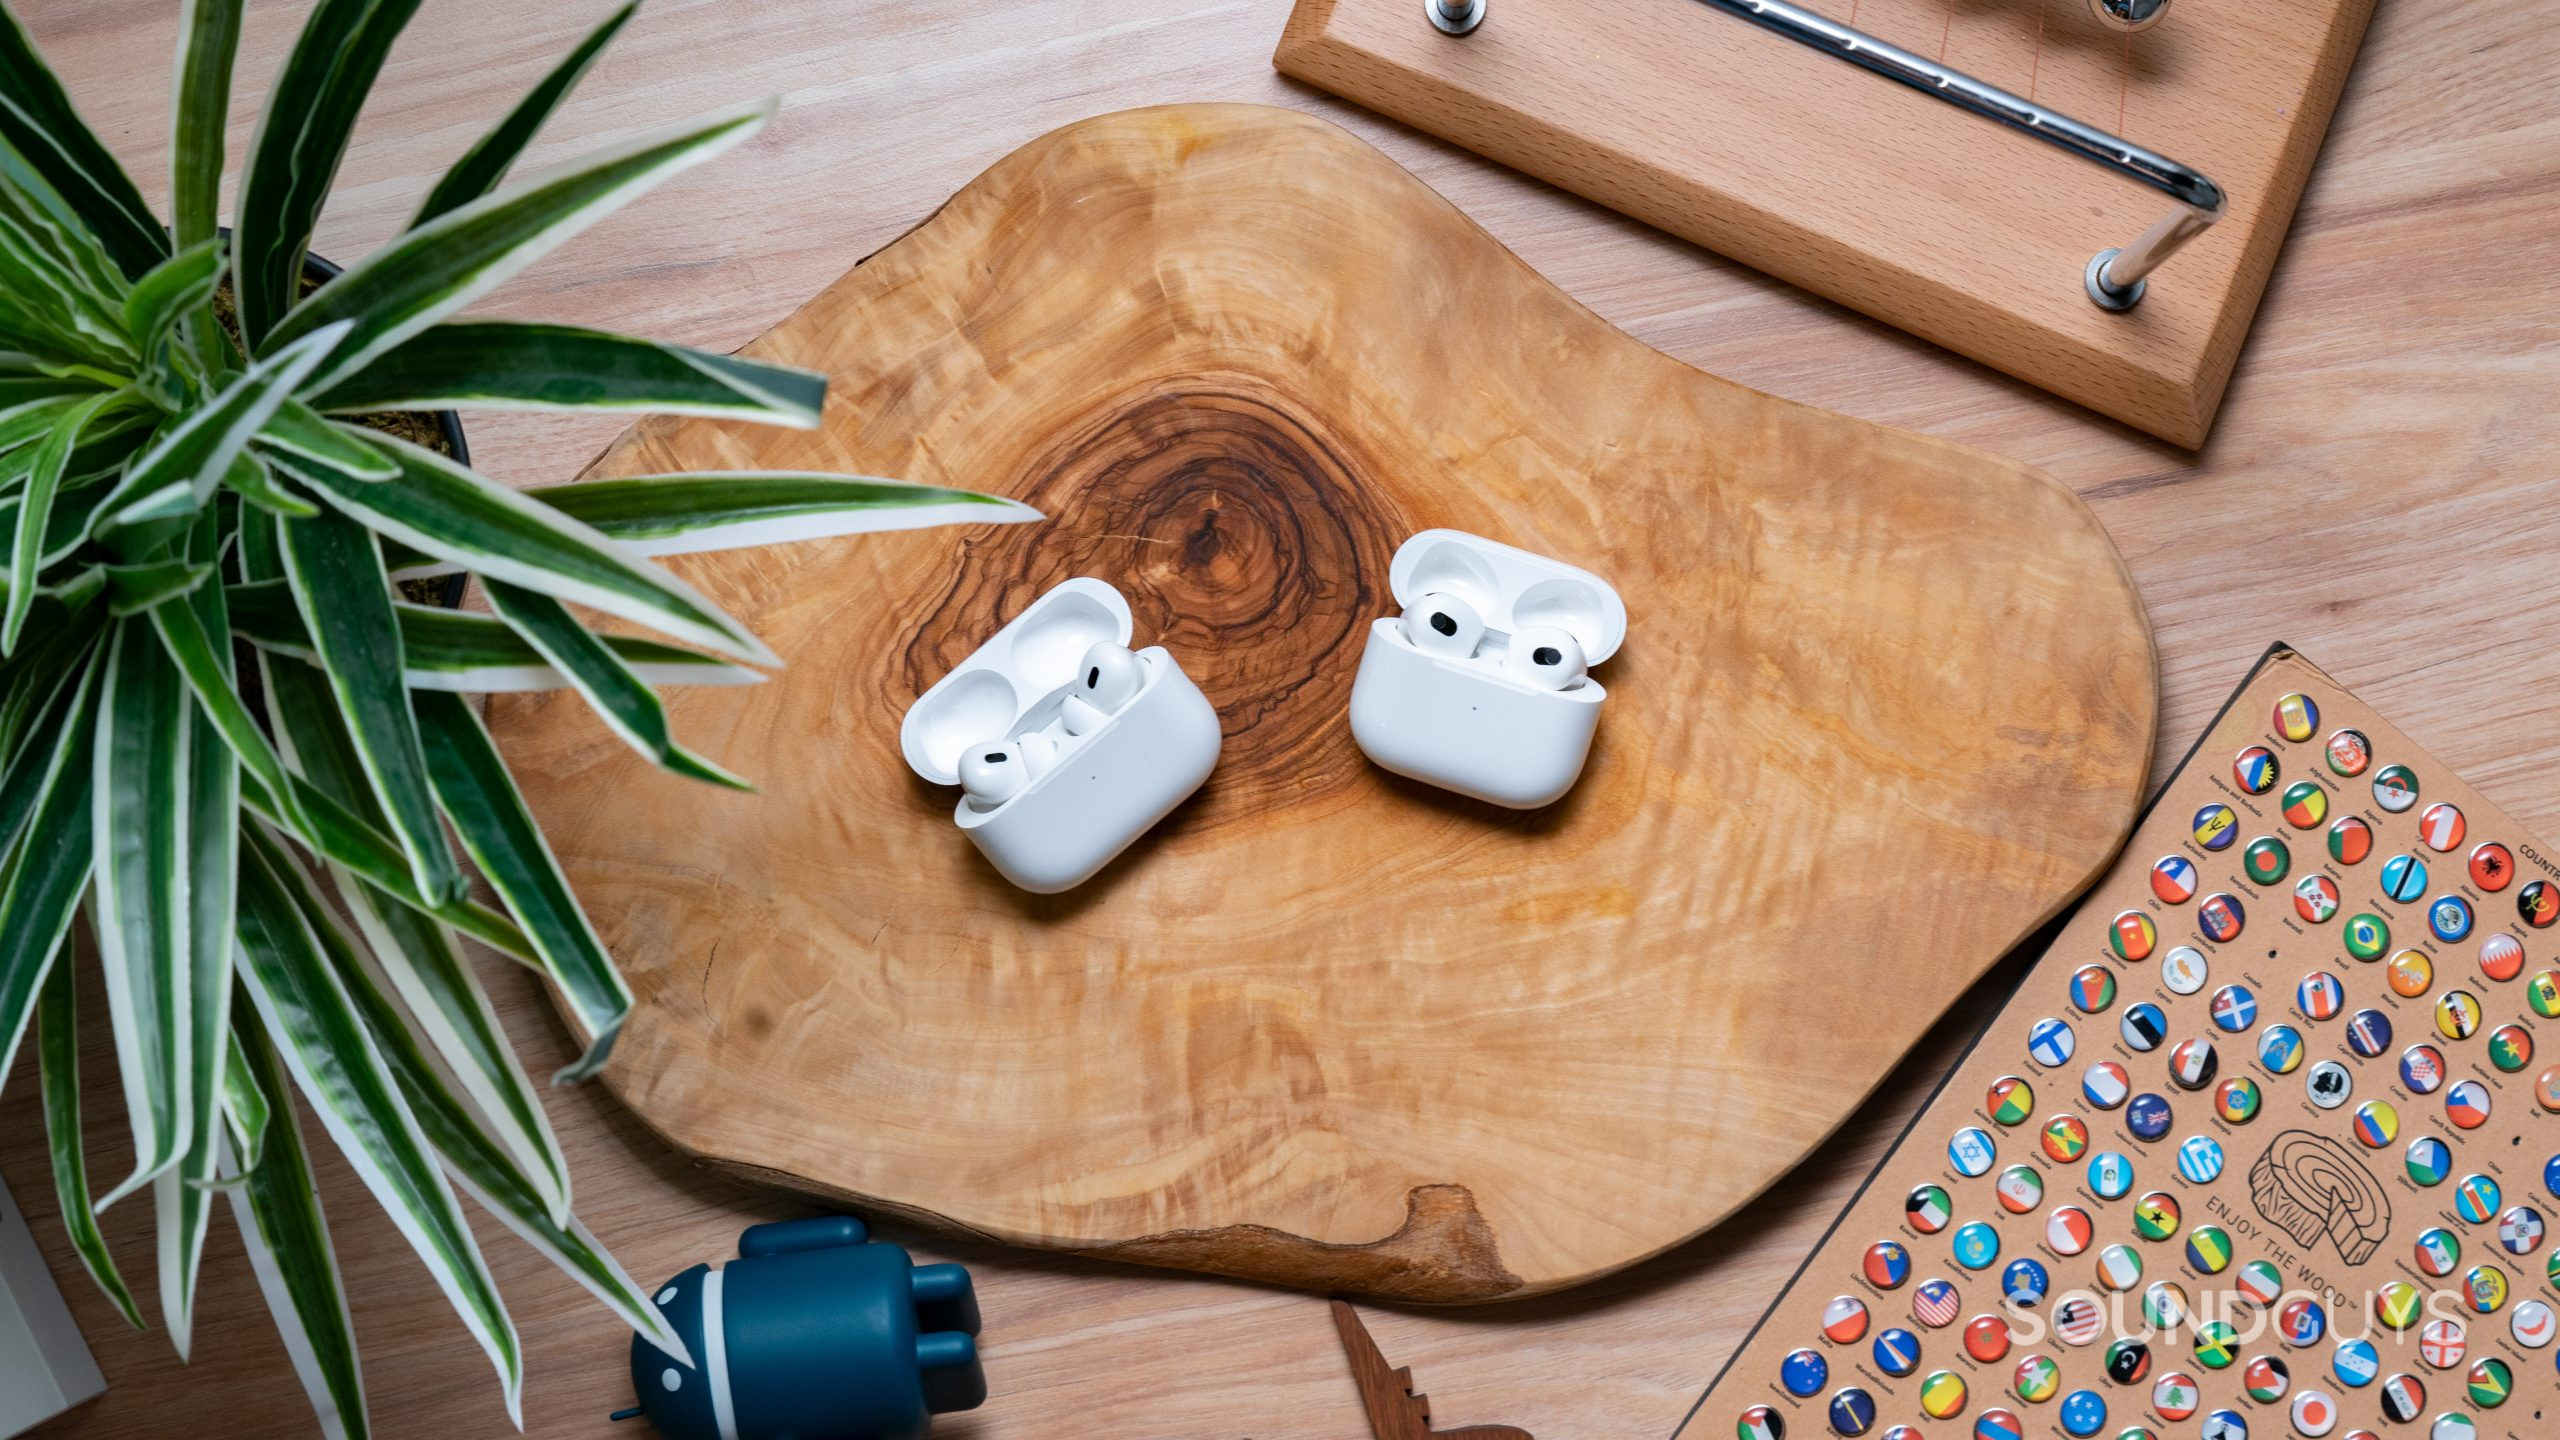 Apple AirPods (2nd generation) vs Apple AirPods (3rd generation) - SoundGuys